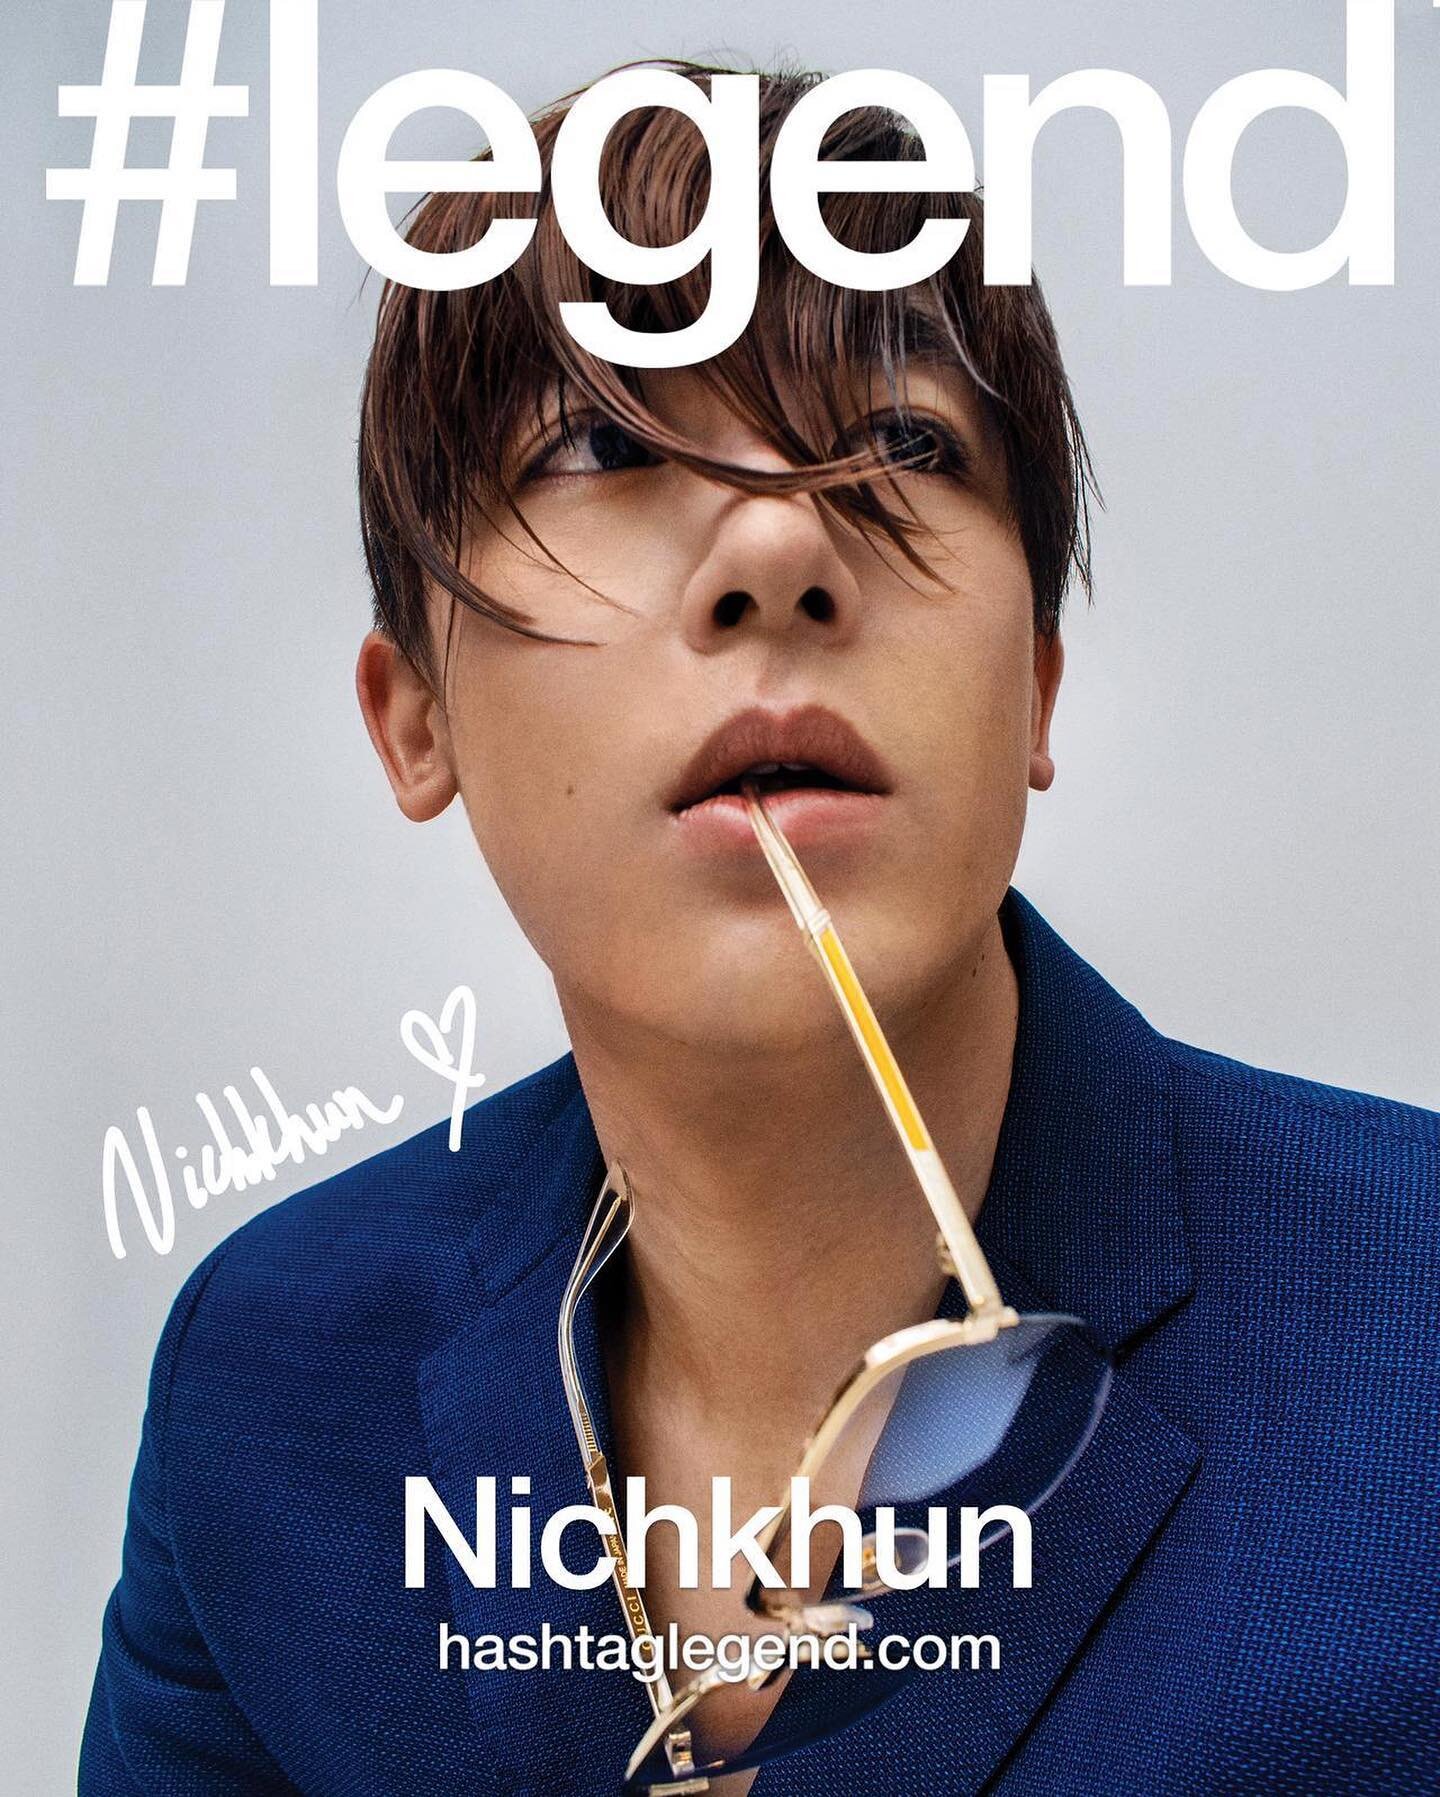 When I was in high school I would learn #Kpop choreo in my bedroom with my best friends. Fast forward 10 years later ⏩ I had the honor of art directing for one of my favorite Kpop idols @khunsta0624. Excited to unveil my new cover story for @hashtag_